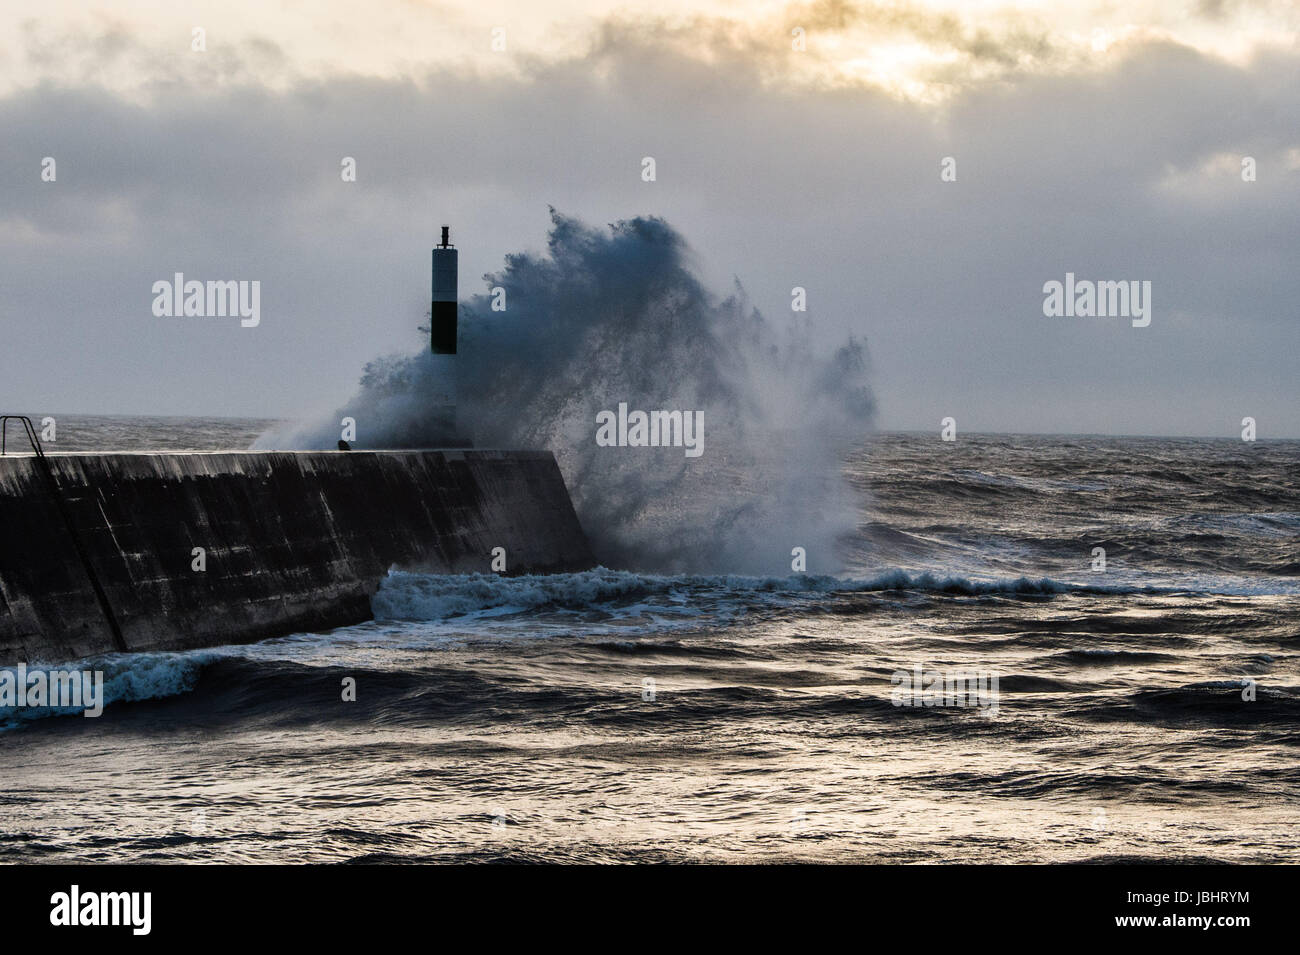 Aberystwyth Wales UK, Sunday 11 June 2017 UK Weather: Unseasonal gale force winds and high tides combine to bring huge waves crashing into the sea defences in Aberystwyth, Wales at the end of the day photo Credit: Keith Morris/Alamy Live News Stock Photo